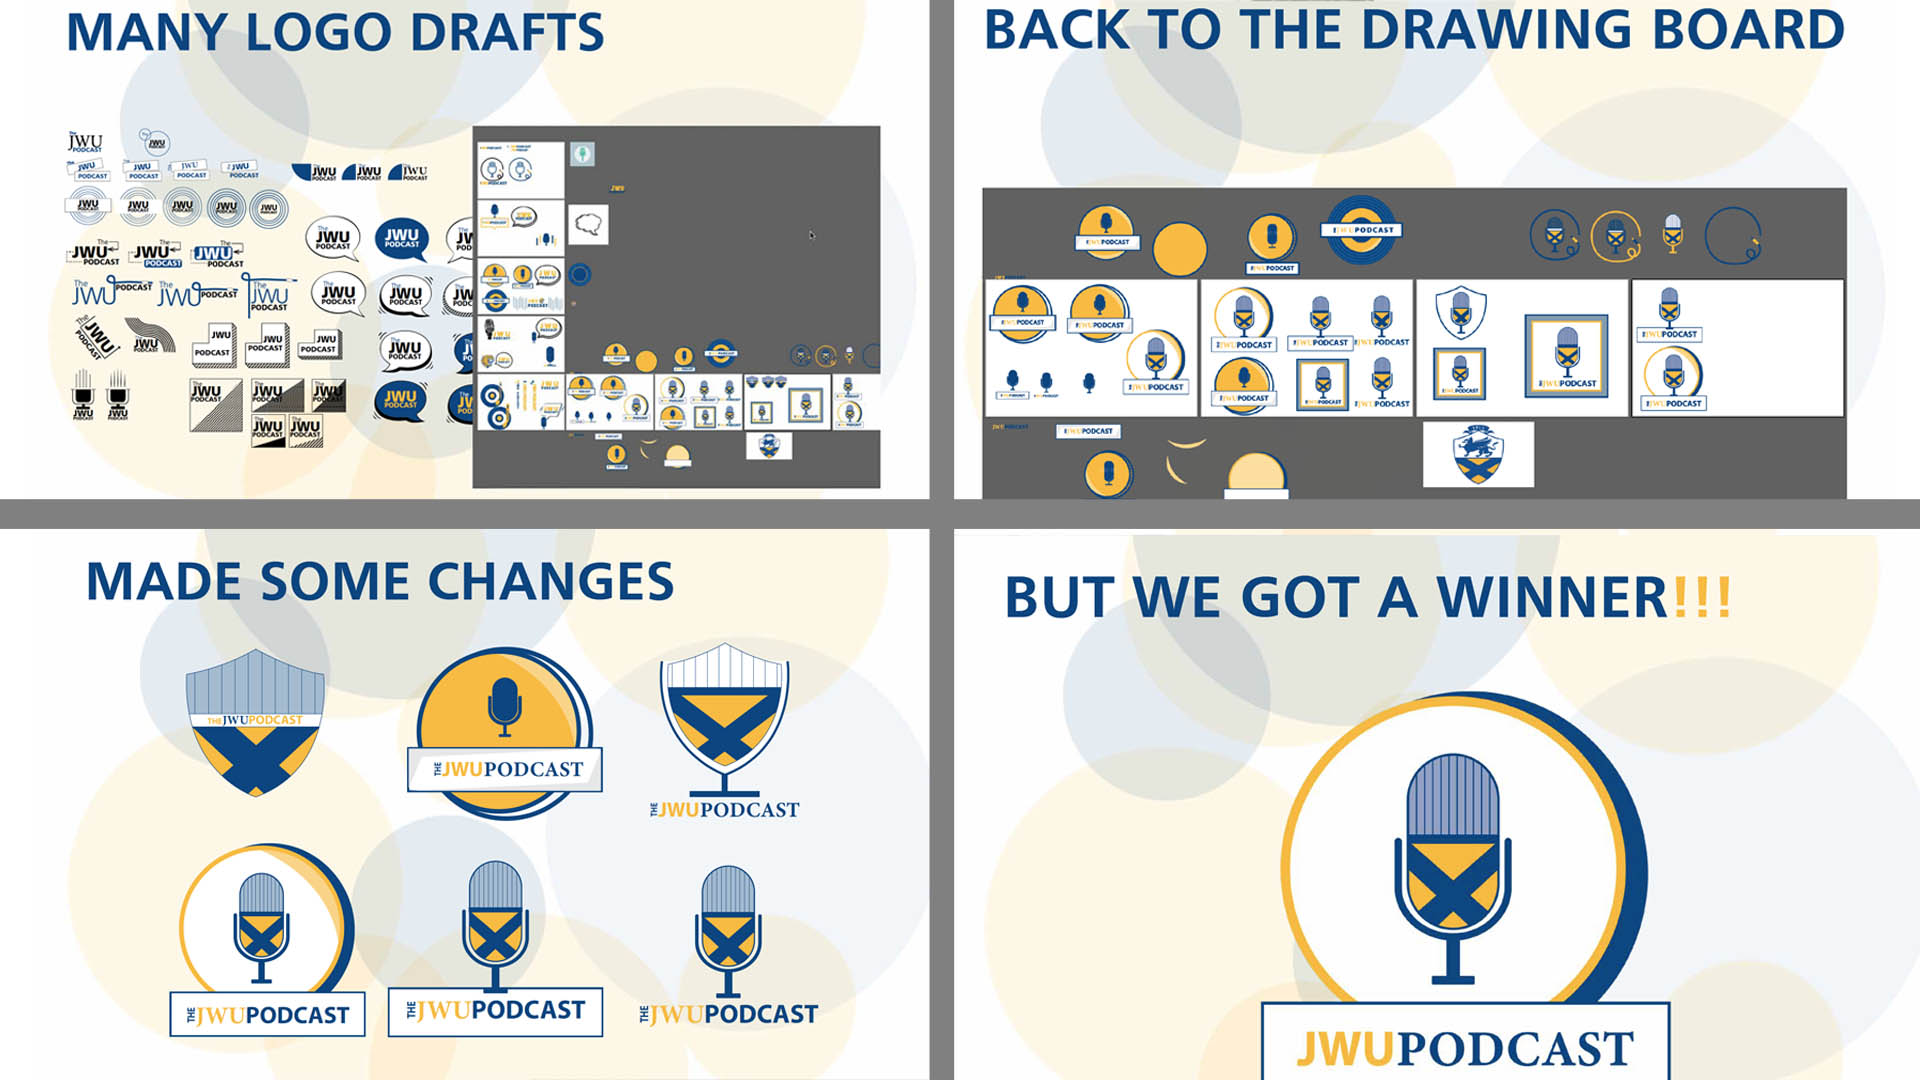 Katilyn Mowery and Haley Walsh worked on developing a logo for the upcoming JWUPodcast.